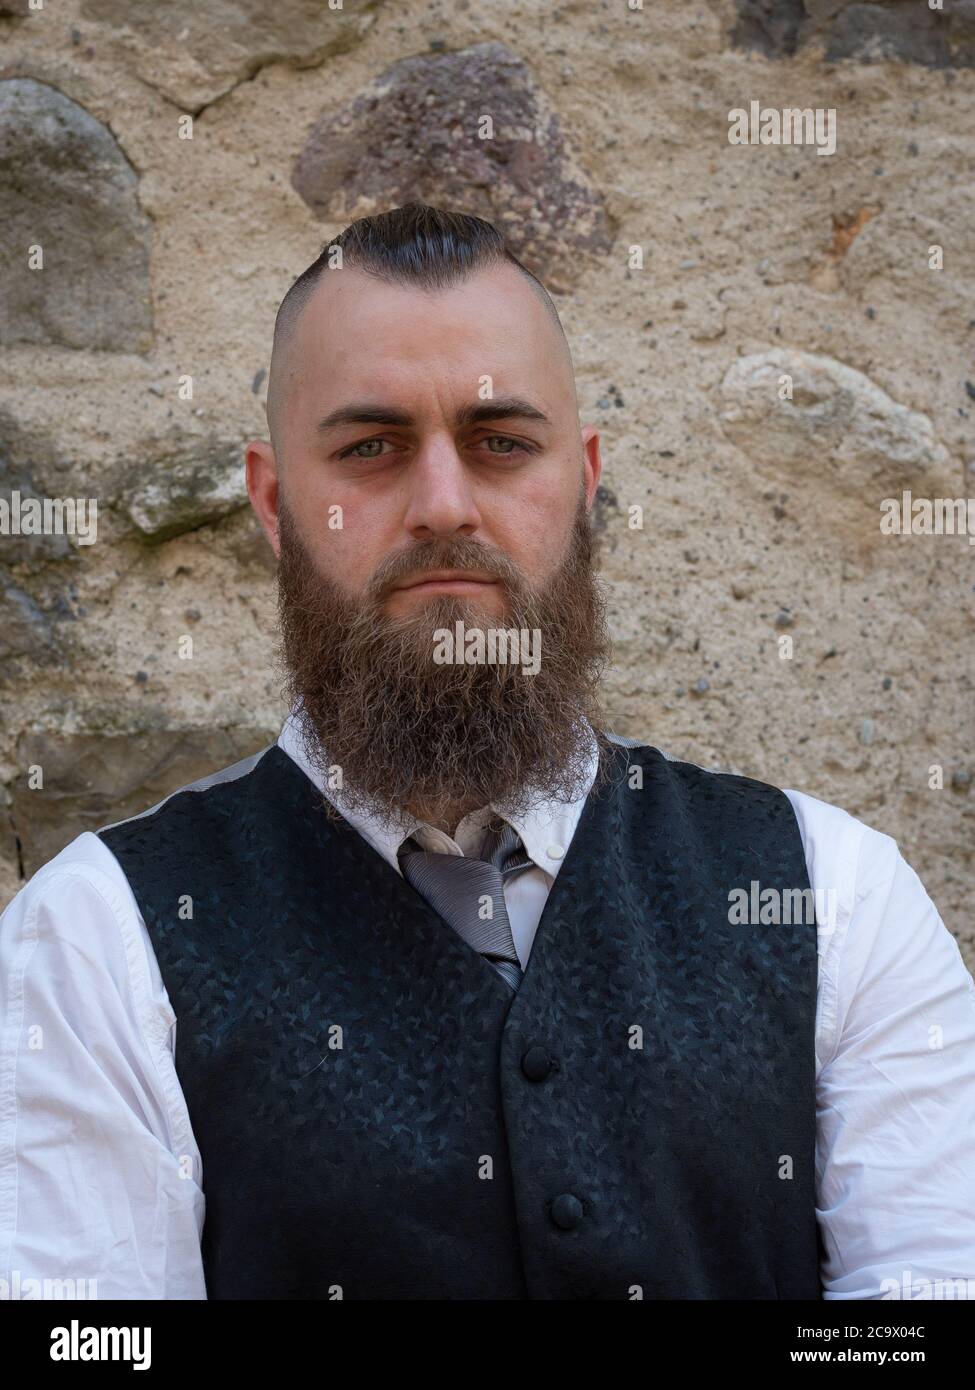 Man with long beard wears a dark elegant suit posing in front of a stone wall Stock Photo